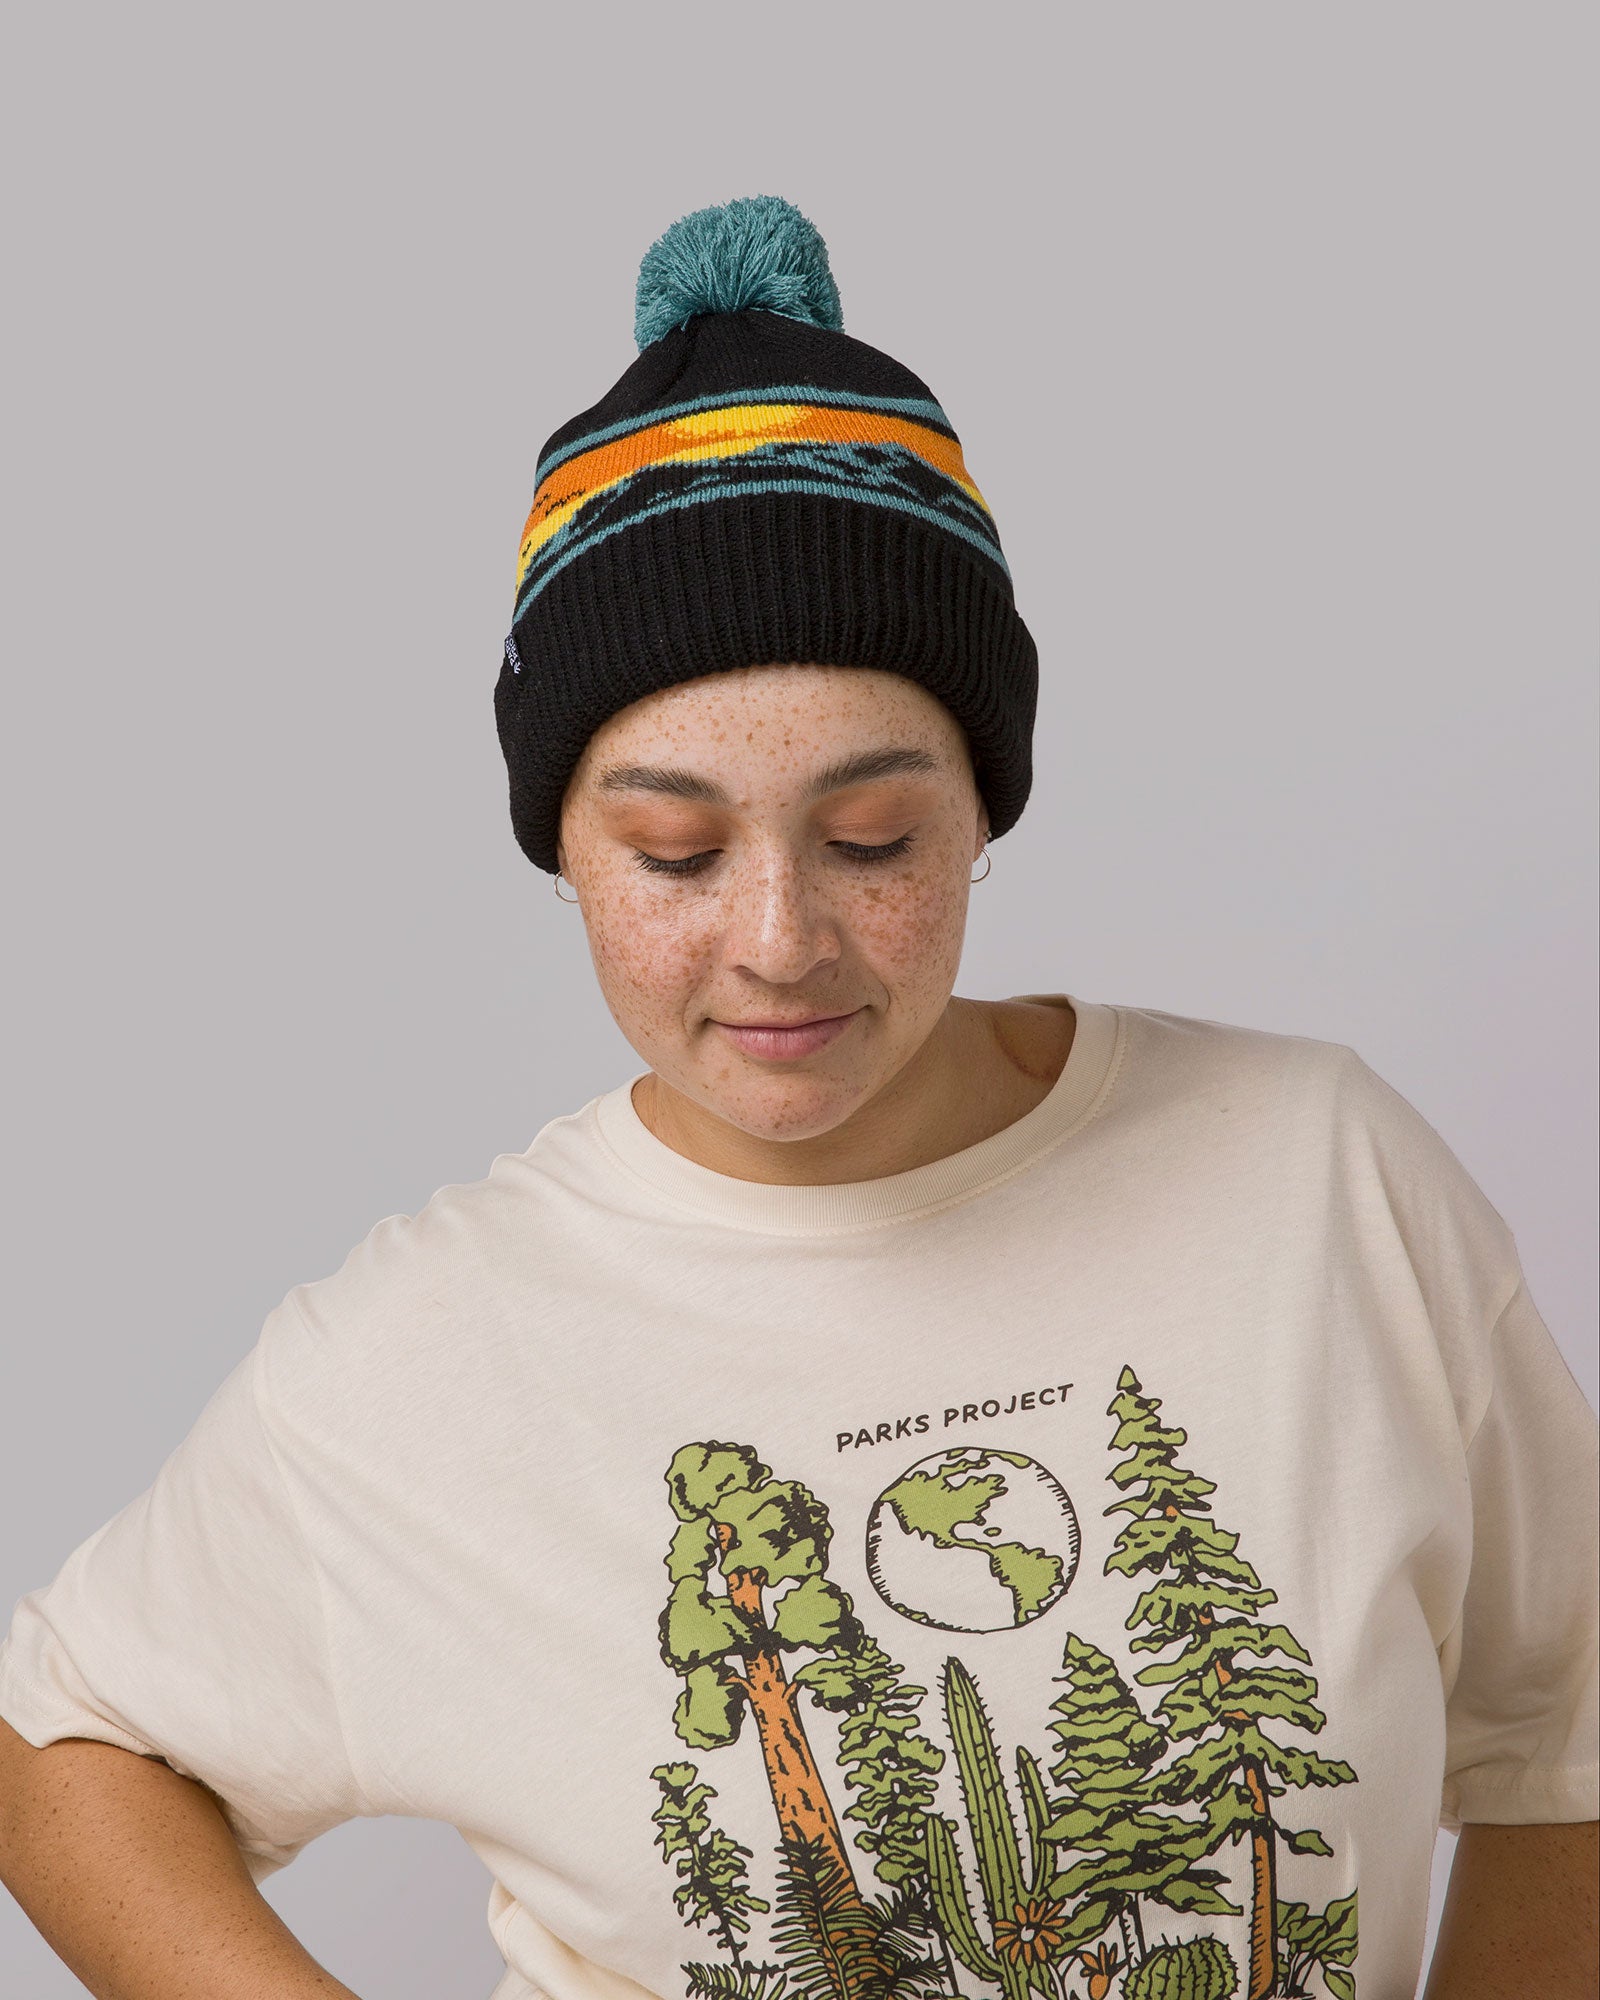 Tahoe Spirit Knitted Beanie Inspired By Lake Tahoe – Parks Project